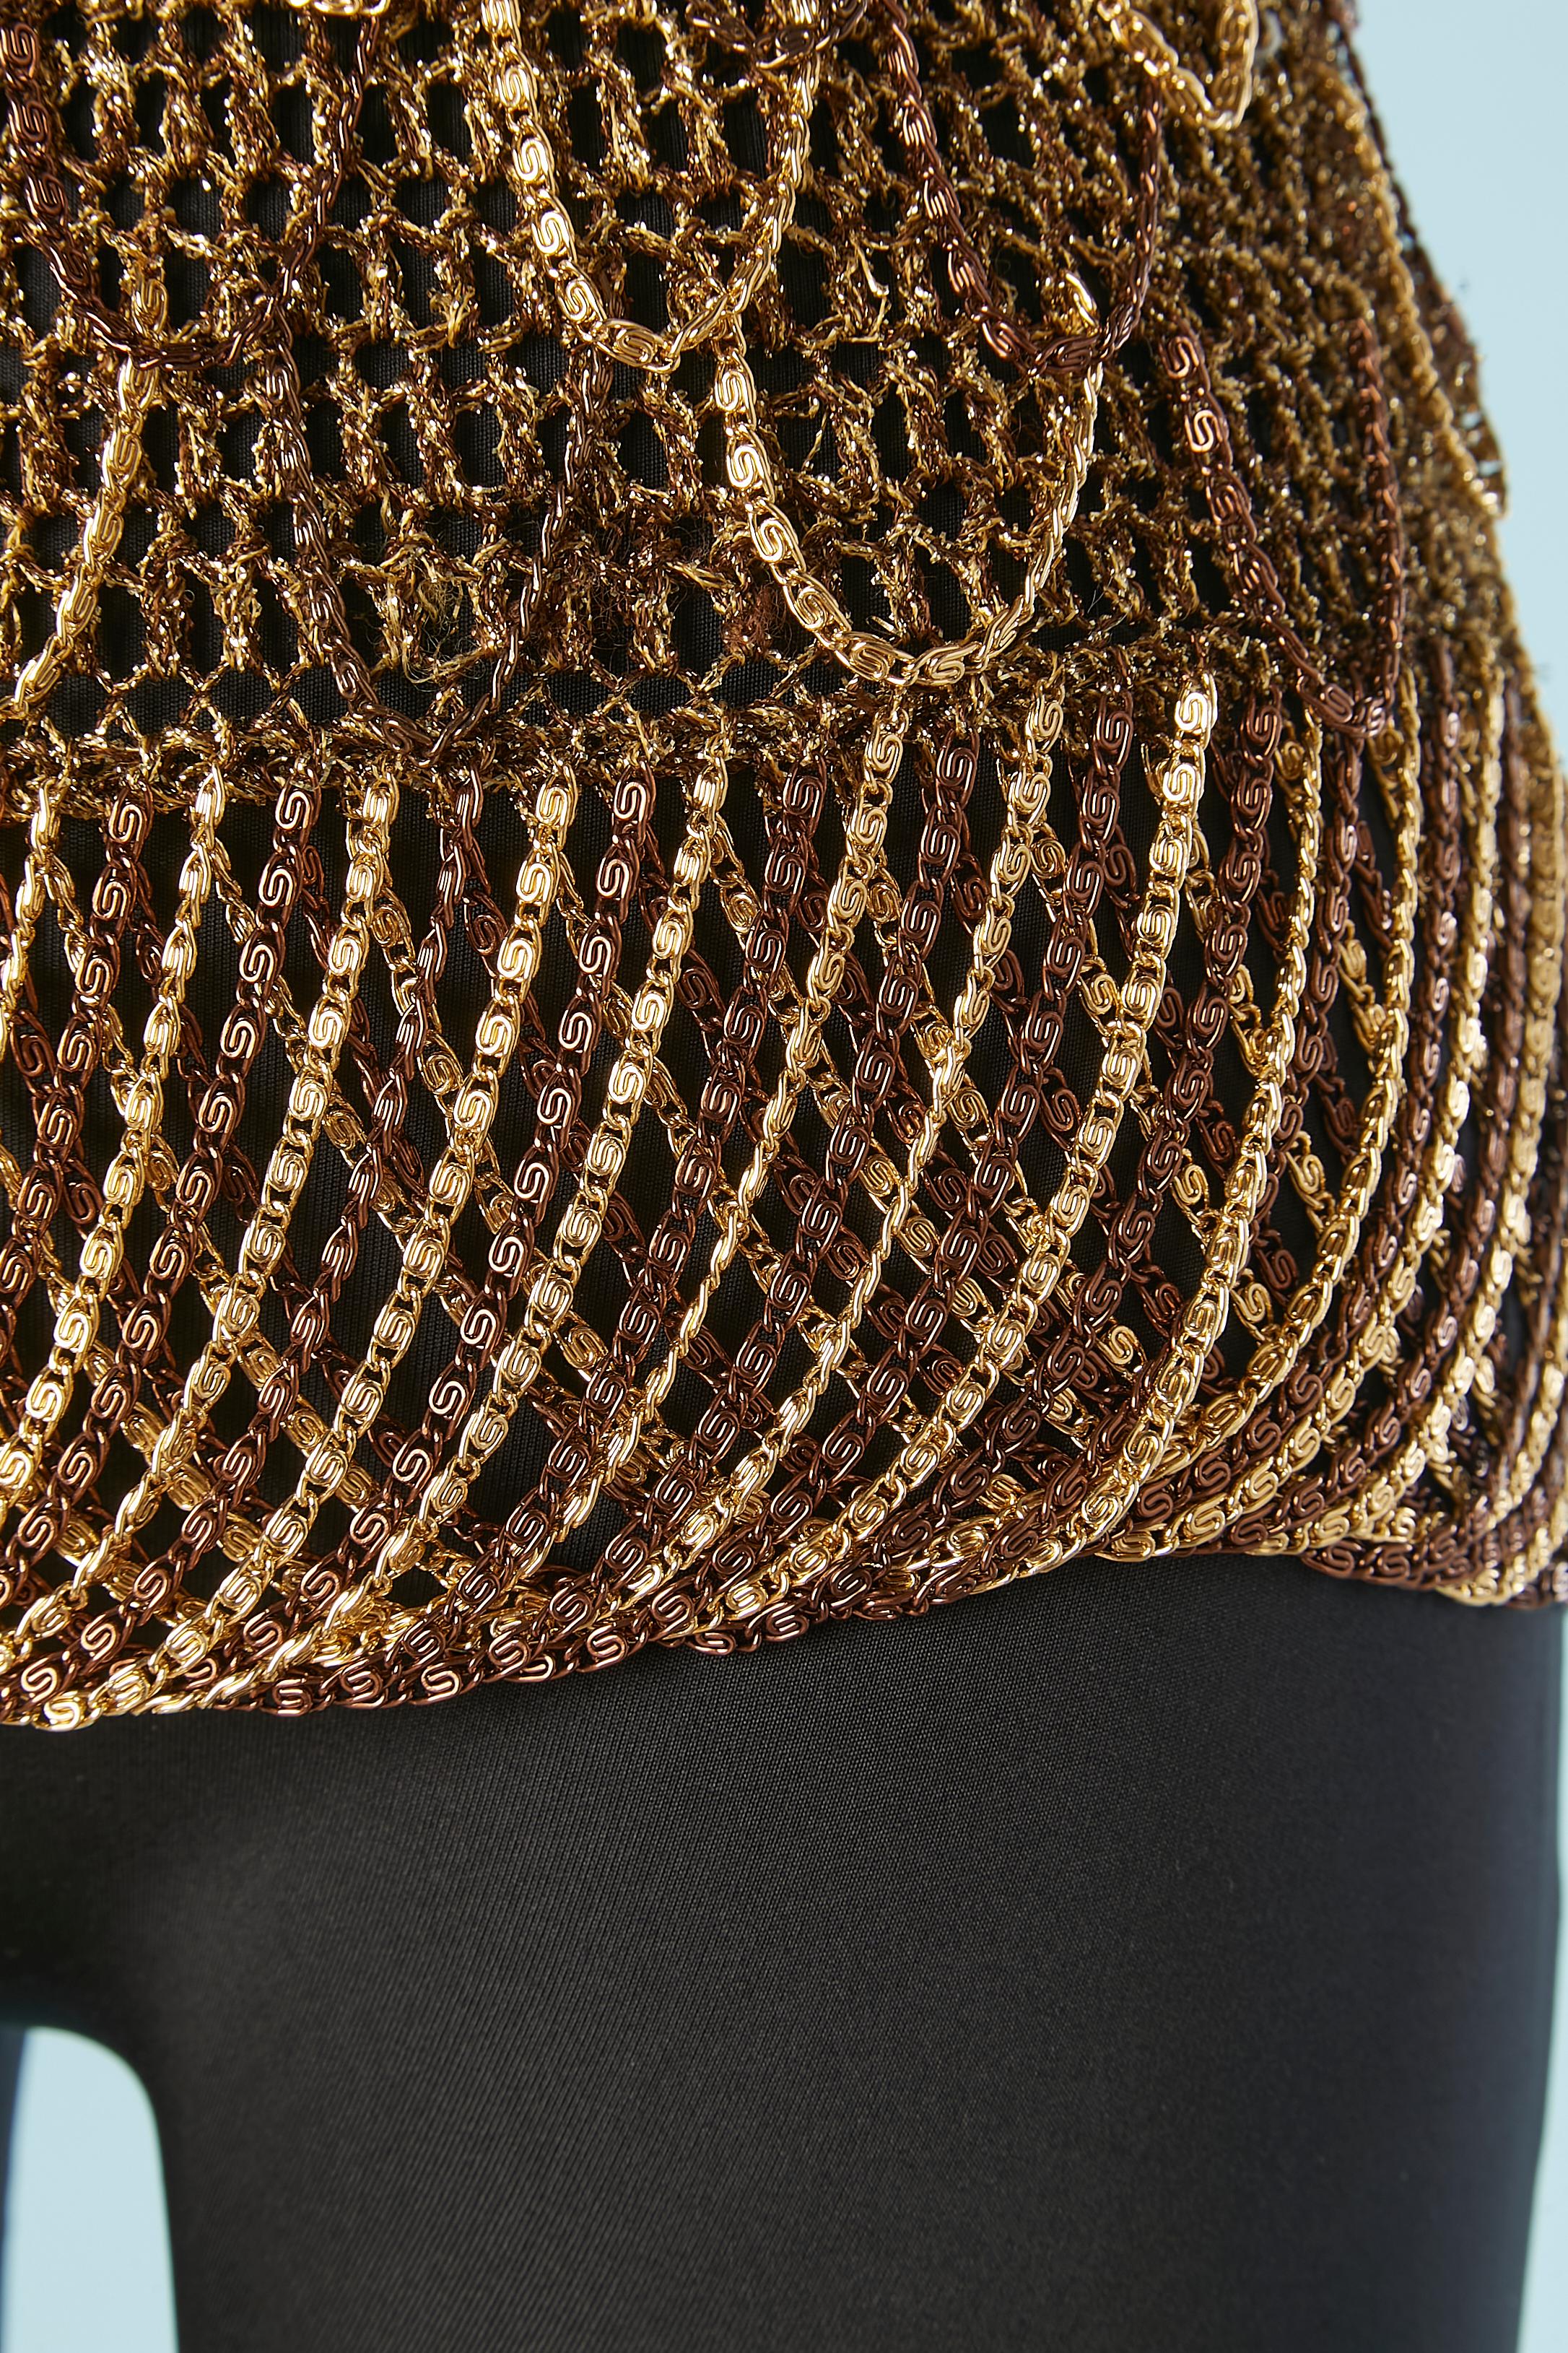 Woven gold and copper tone chain and knit sweater Loris Azzaro 1970's  In Excellent Condition For Sale In Saint-Ouen-Sur-Seine, FR